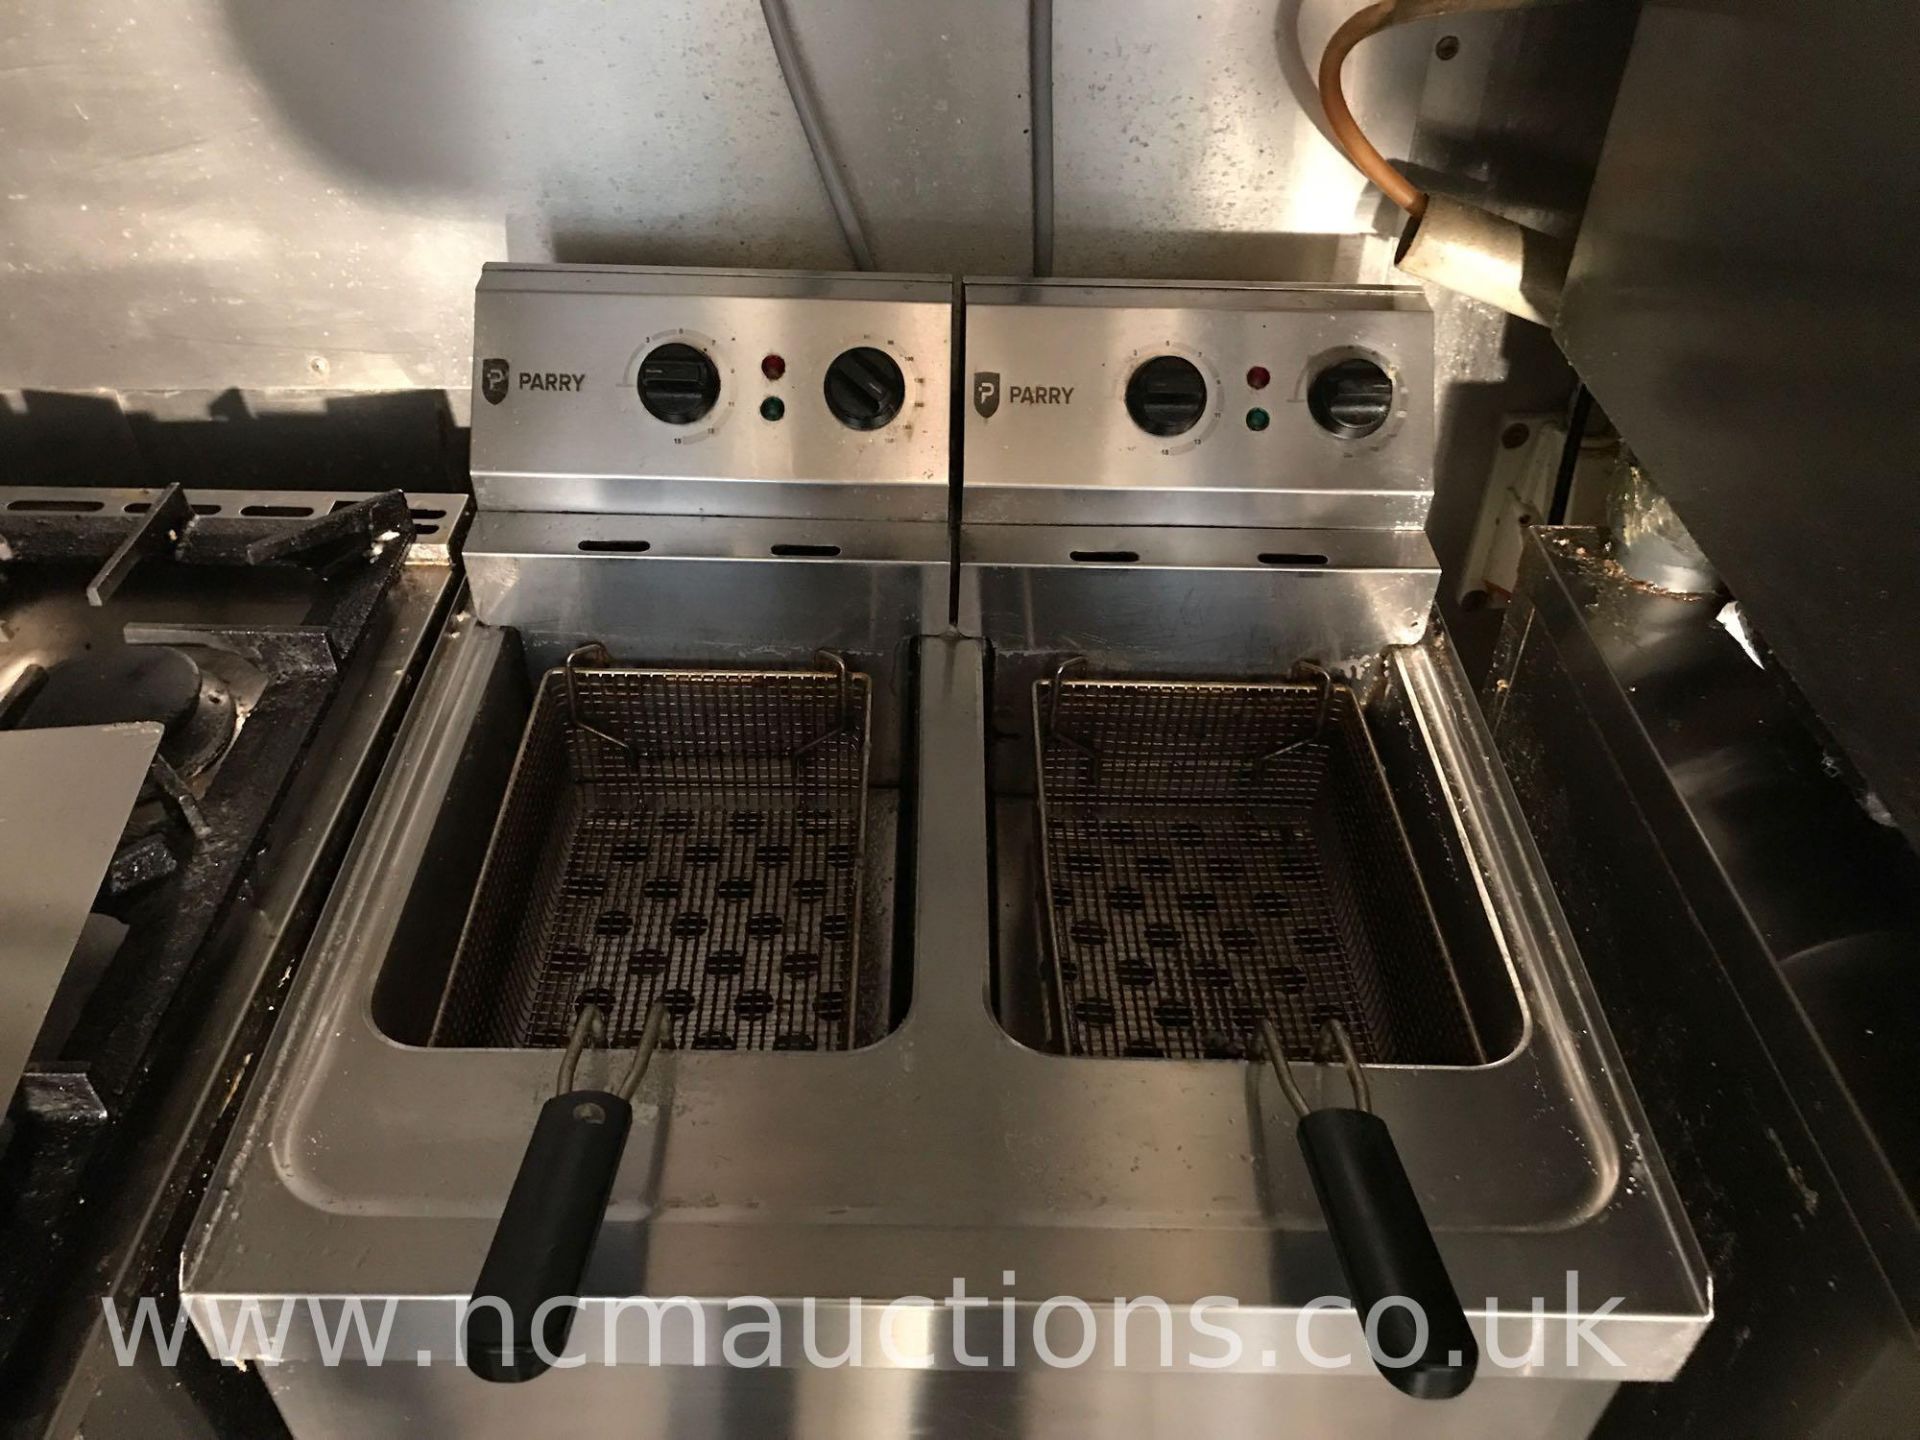 Parry double Fryer - Image 3 of 4